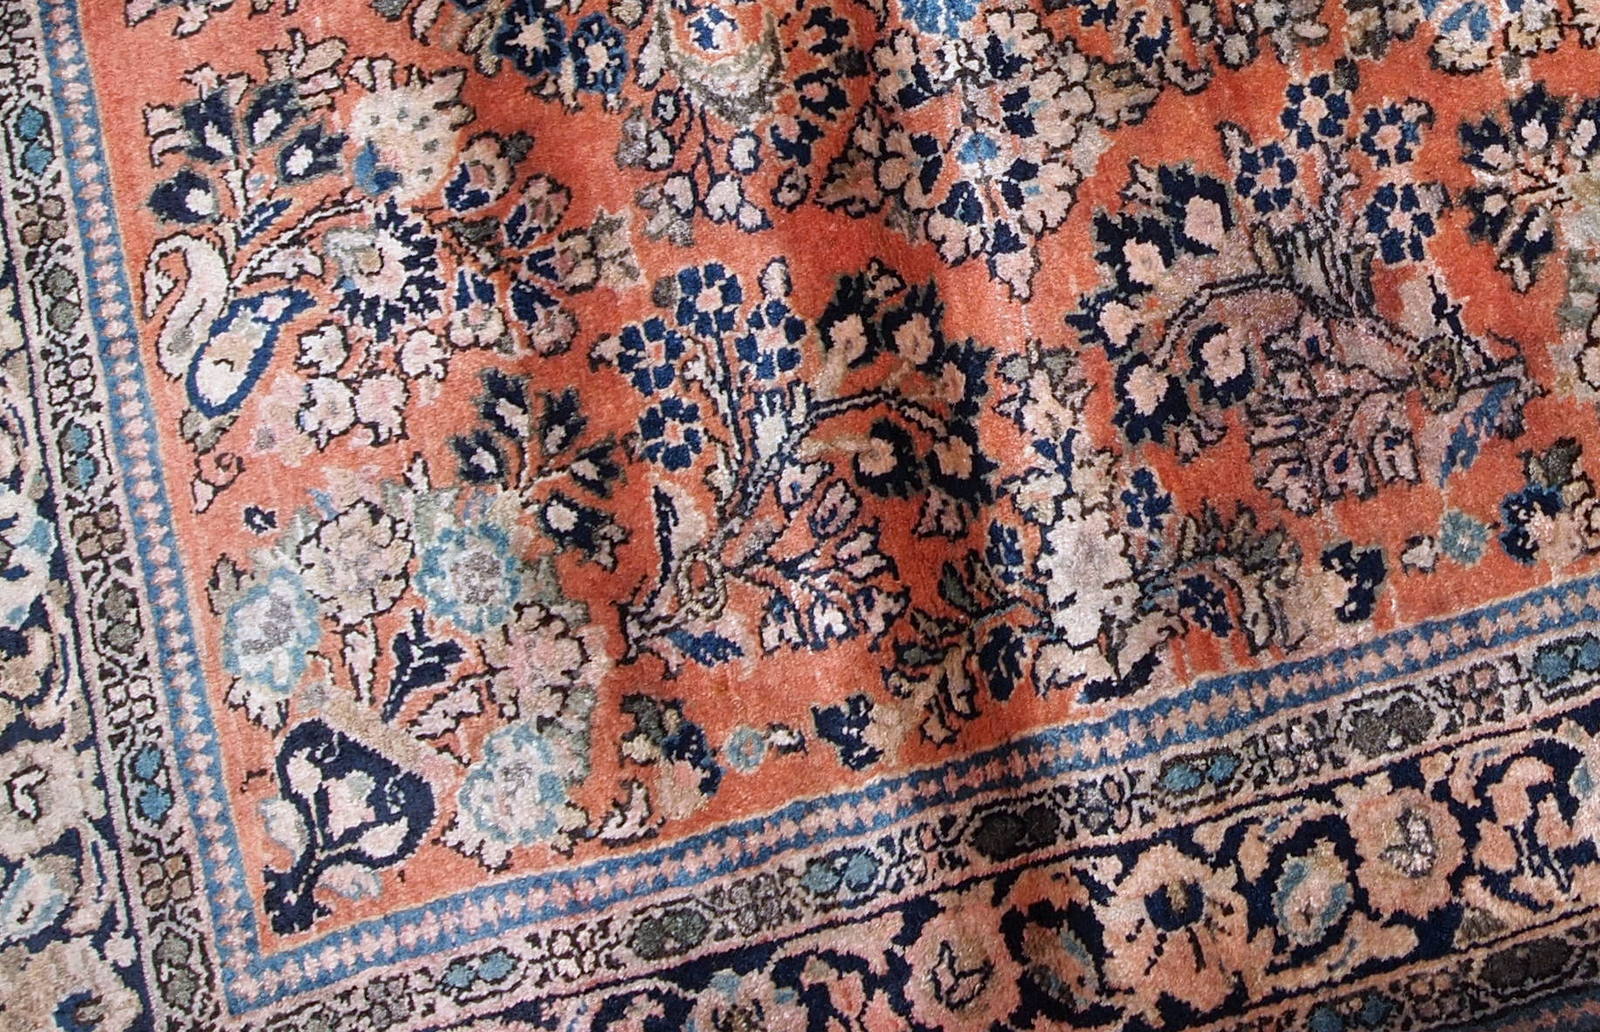 Hand-weaved antique Sarouk square rug from the beginning of 20th century. The rug is in original good condition, made in classic floral design in red and sky blue shades.